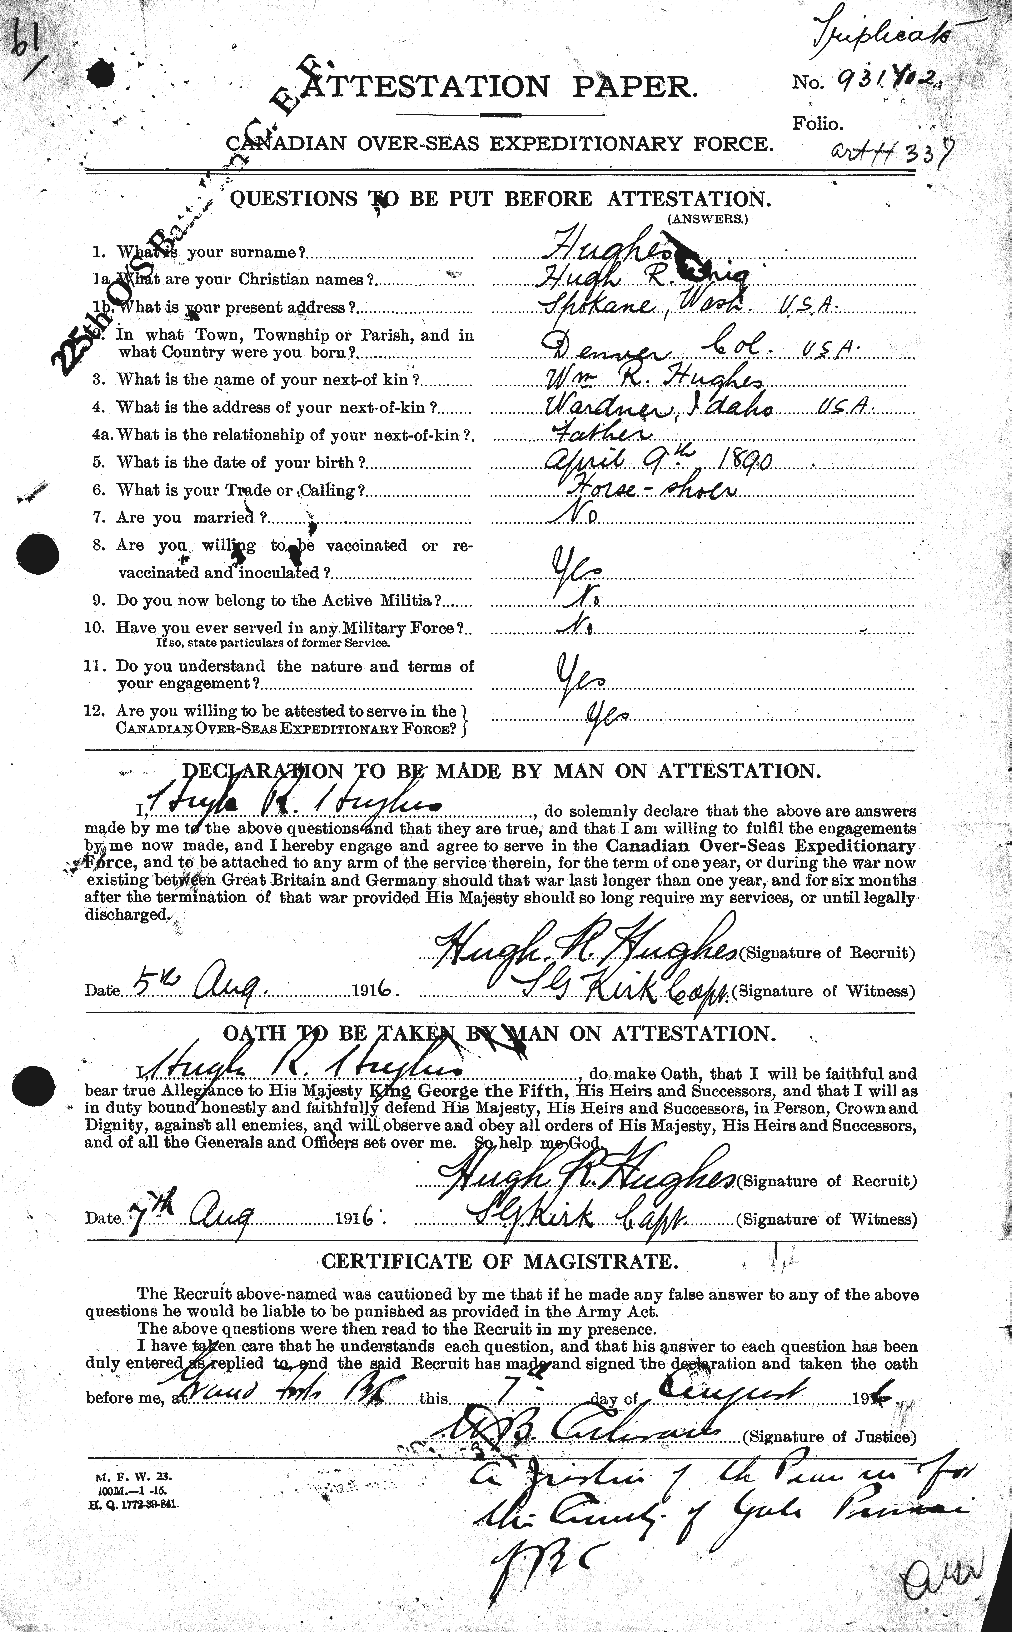 Personnel Records of the First World War - CEF 403925a